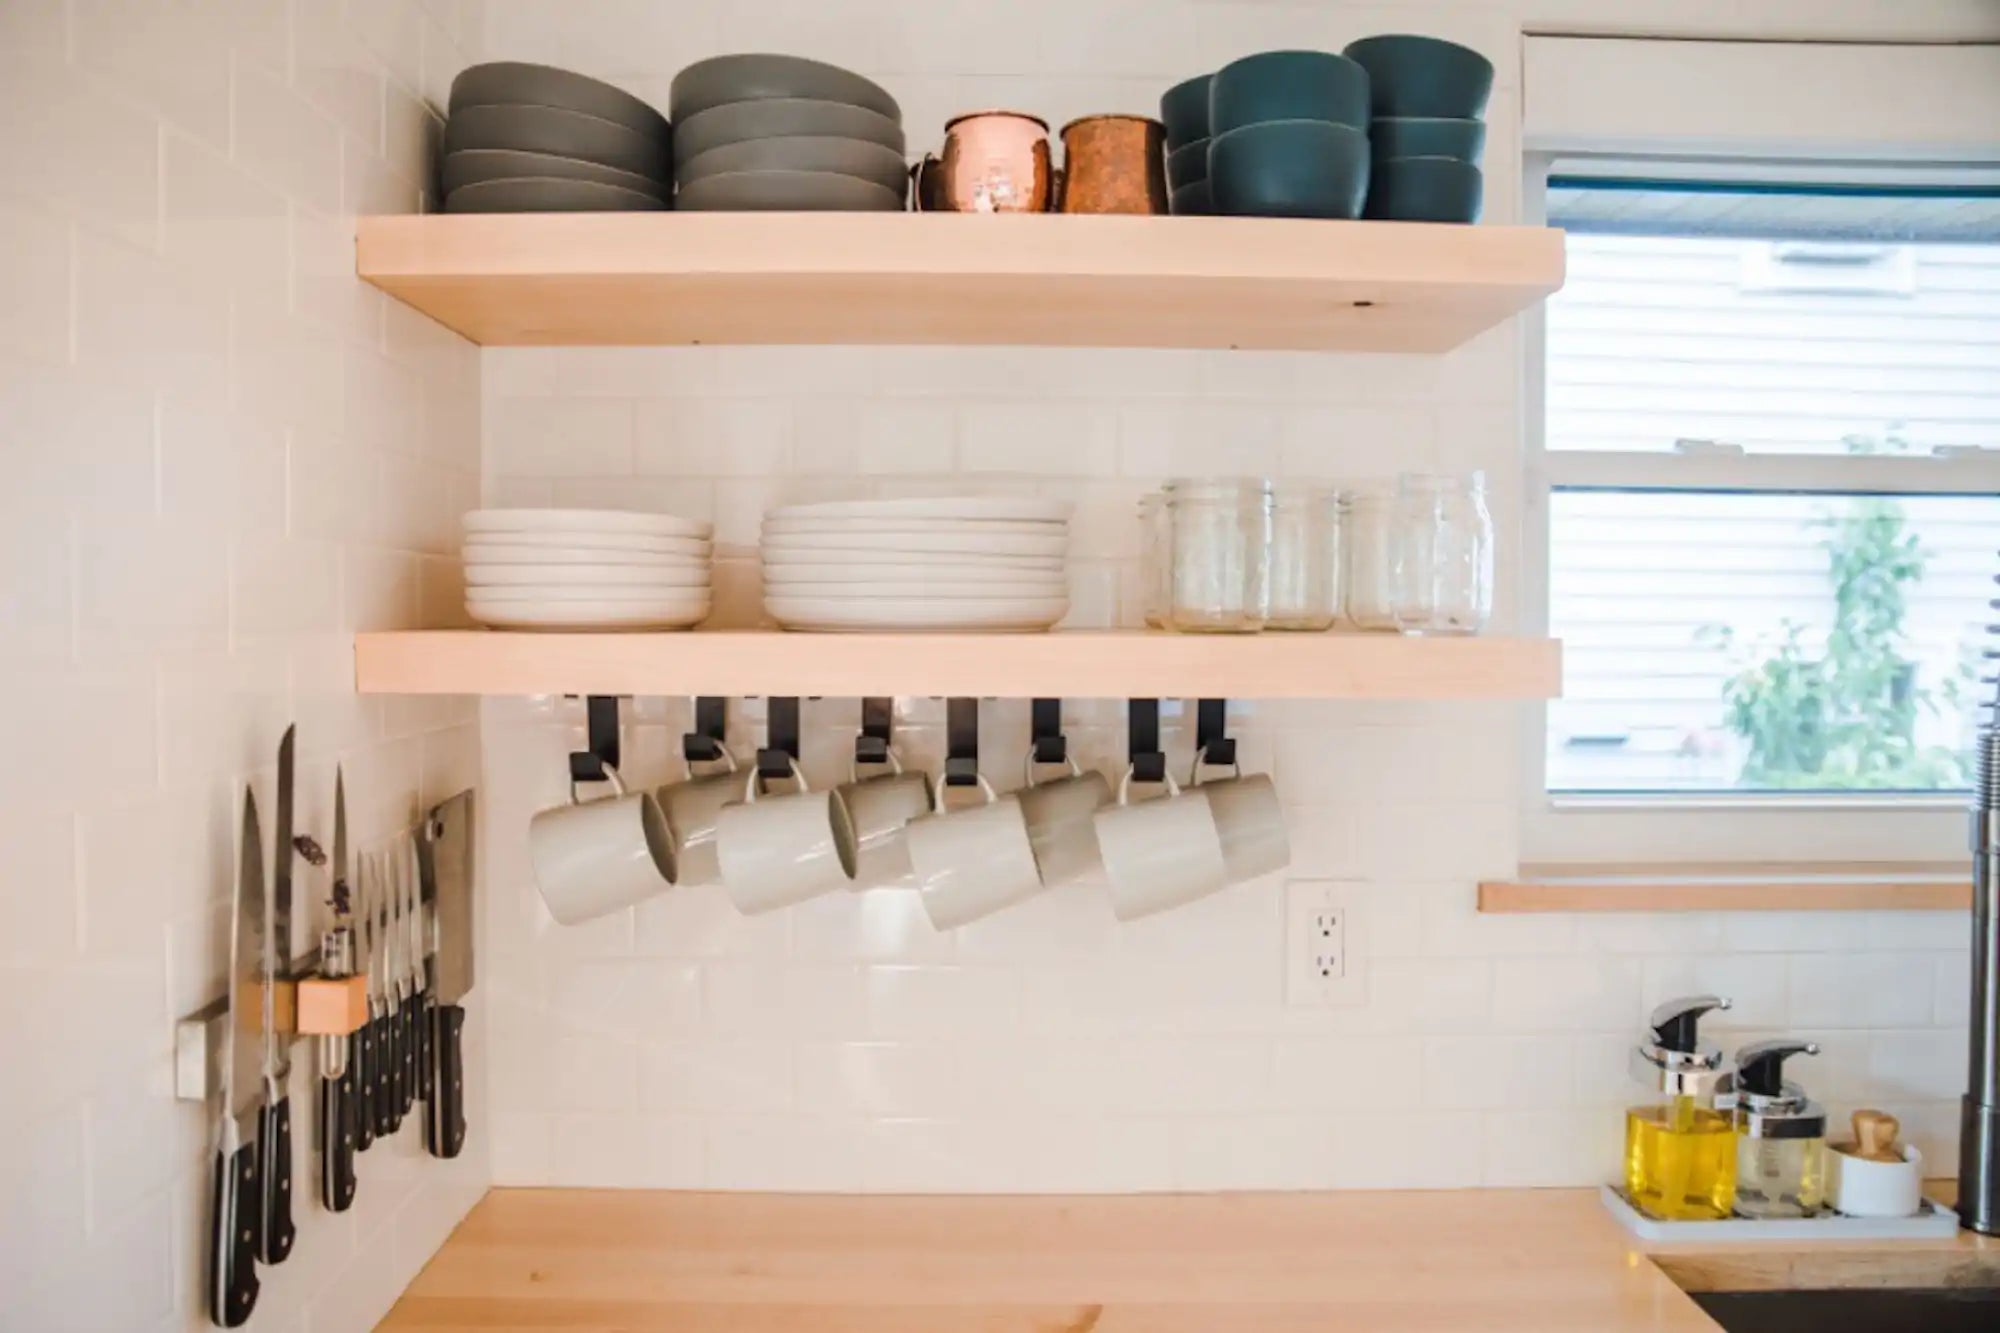 shelving - What's the best way to mount a shelf below existing cabinets? -  Home Improvement Stack Exchange